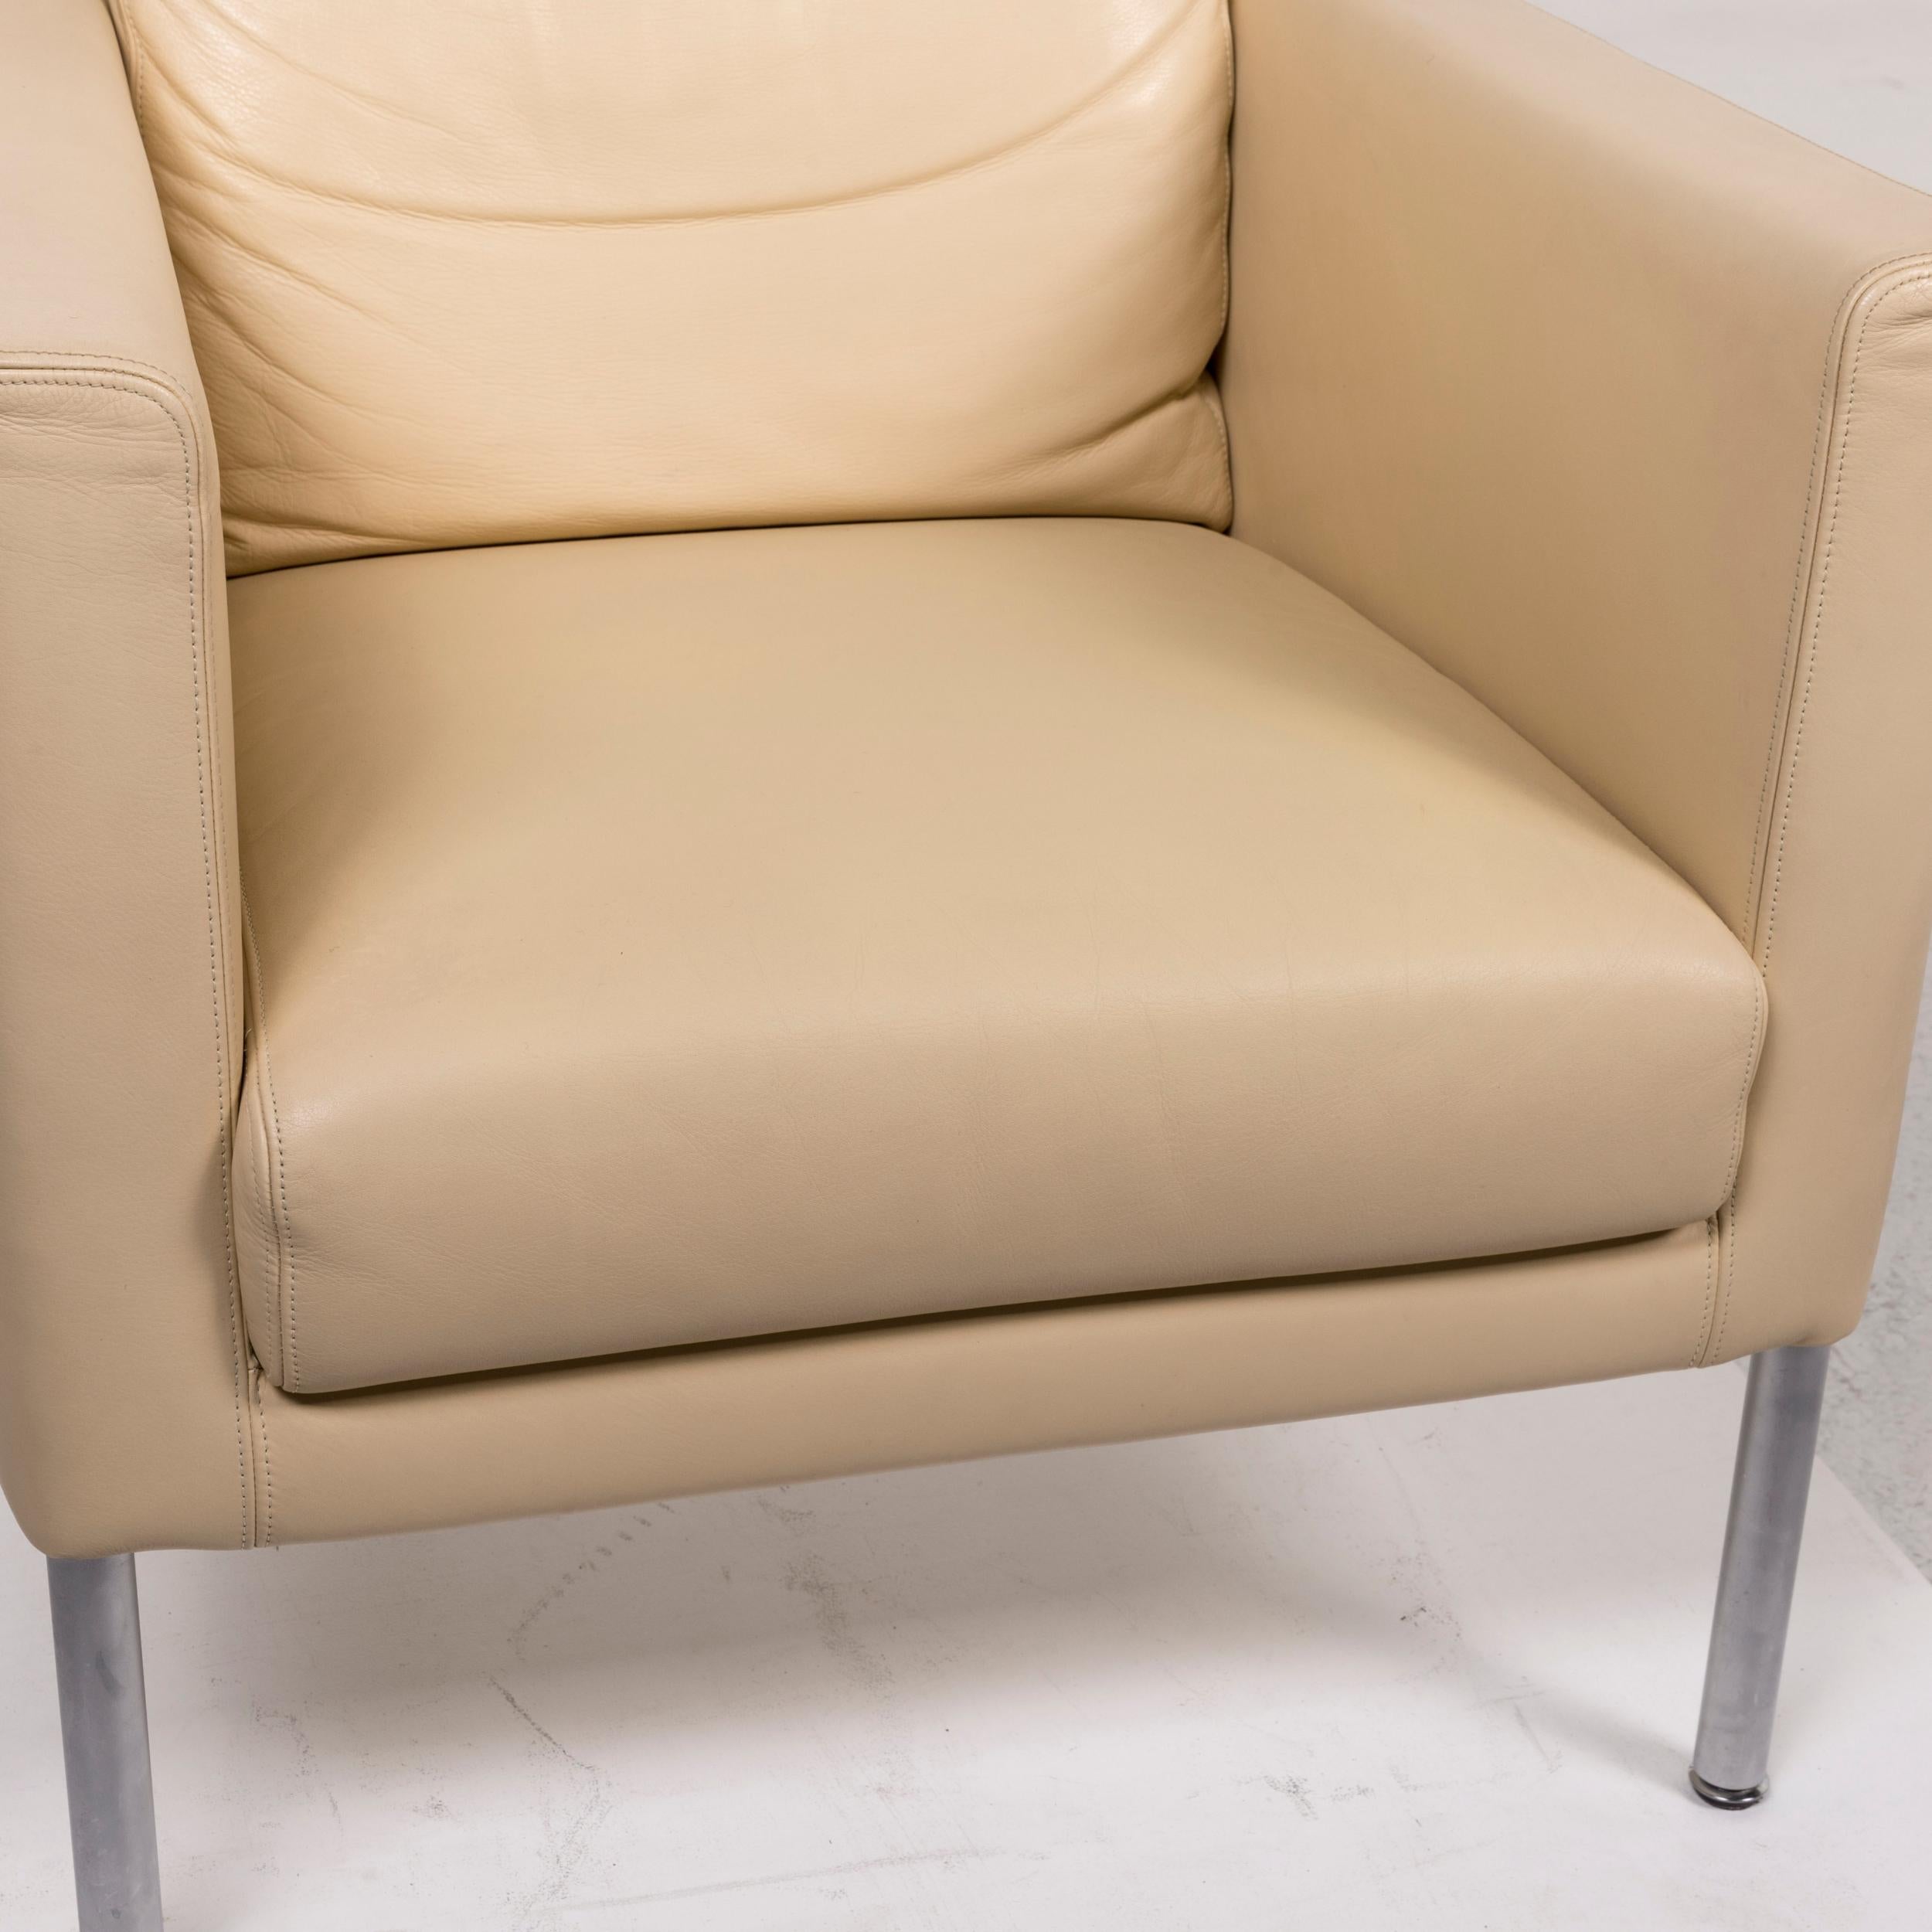 We bring to you a Walter Knoll Jason armchair set cream 2 armchair.


 Product measurements in centimeters:
 

Depth 76
Width 72
Height 82
Seat-height 44
Rest-height 65
Seat-depth 48
Seat-width 52
Back-height 38.
 